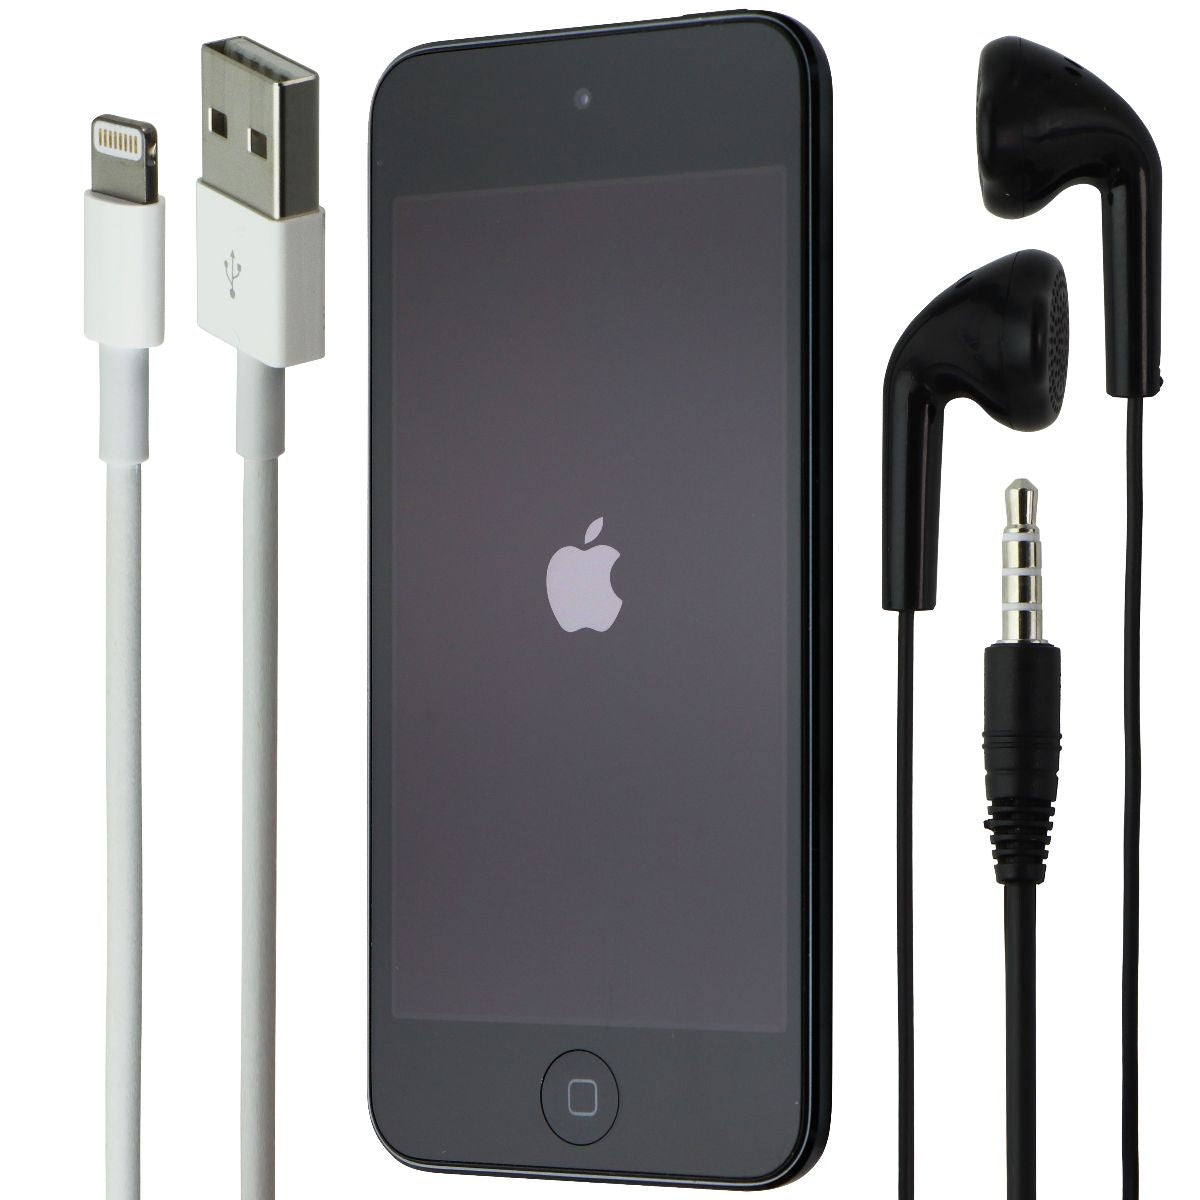 Apple iPod Touch 6th Gen (Wi-Fi Only) with Accessory Bundle - 16GB / Space Gray